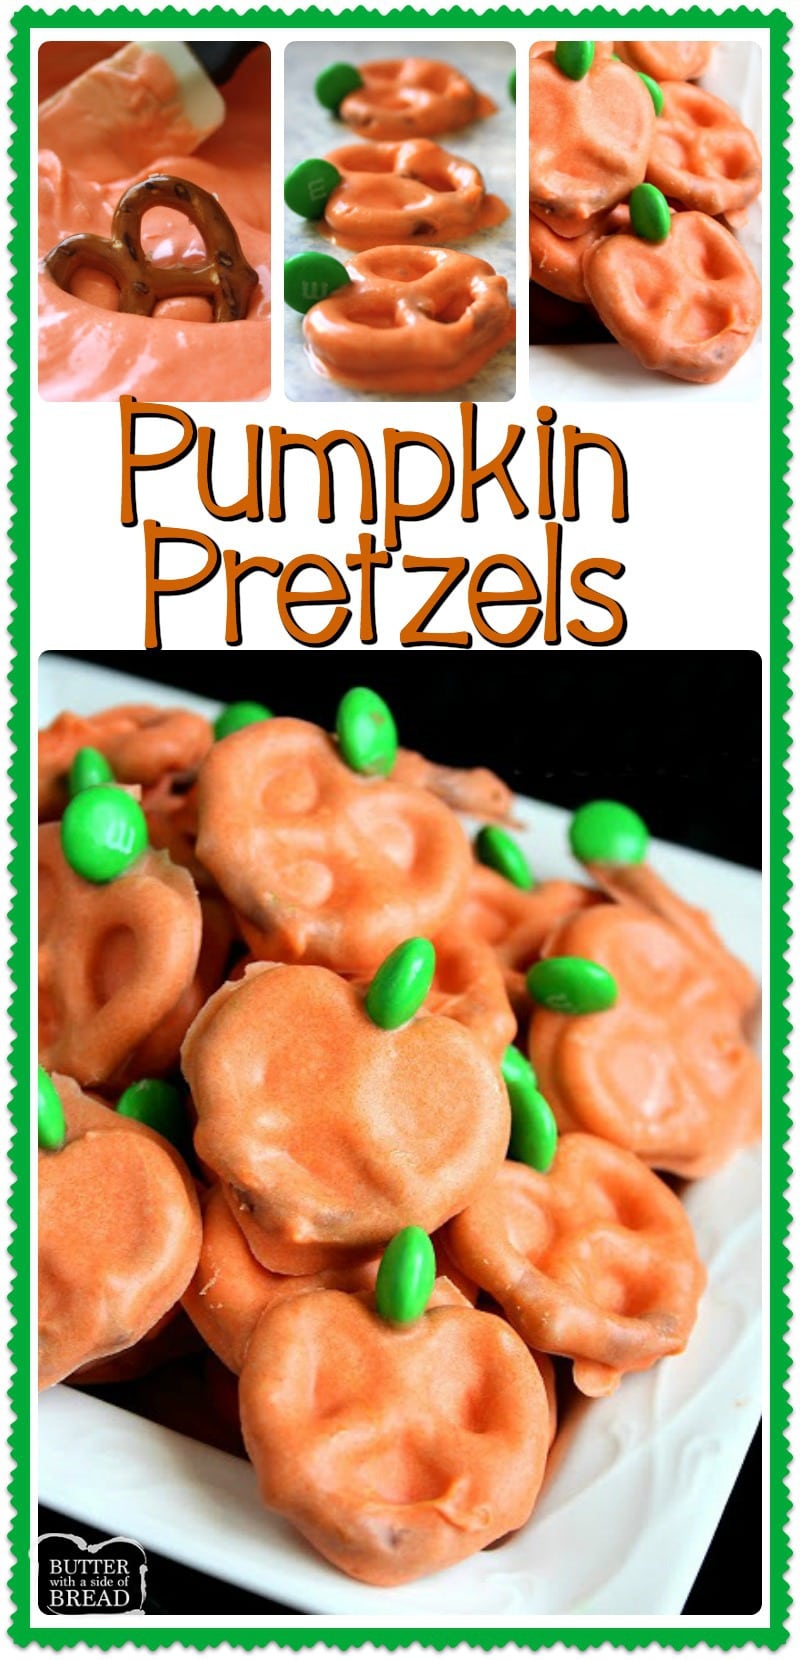 Easy Pumpkin Pretzels are chocolate covered pretzels made with just a few ingredients and perfect for Halloween! These chocolate covered pretzels are a fun and festive treat to serve at your next Halloween party or bring to your kids school for their class party.